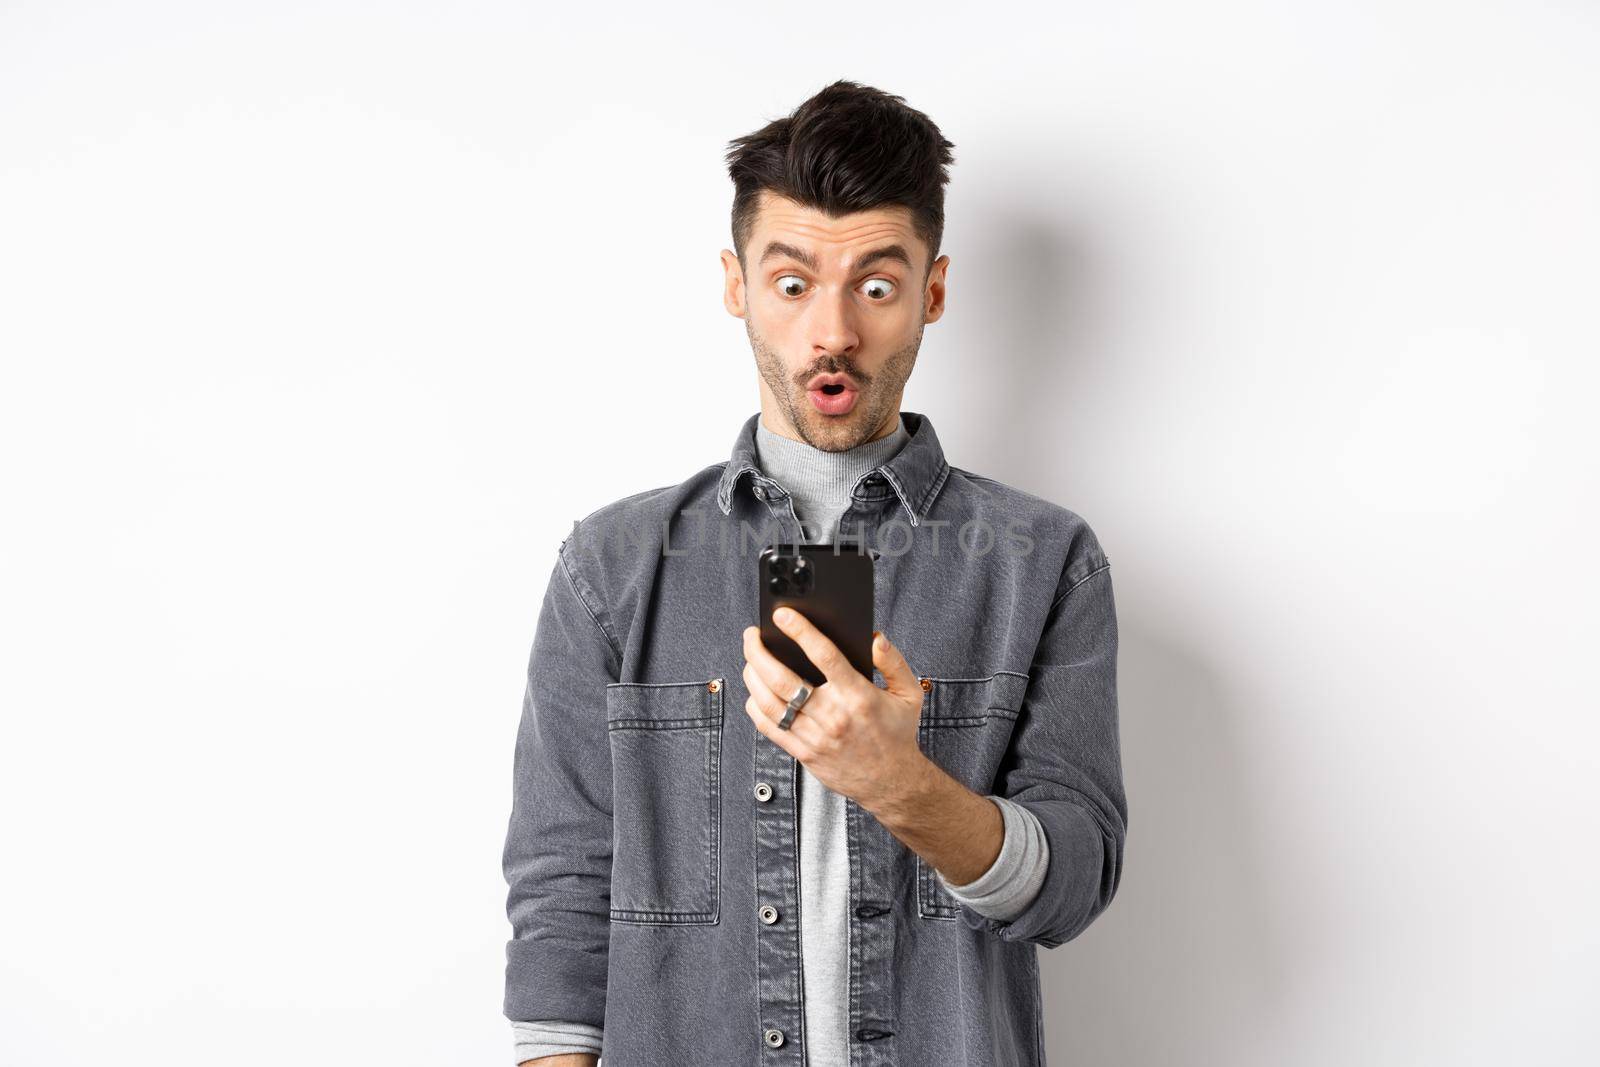 Man look surprised at smartphone screen, receive exciting news on phone, standing against white background.